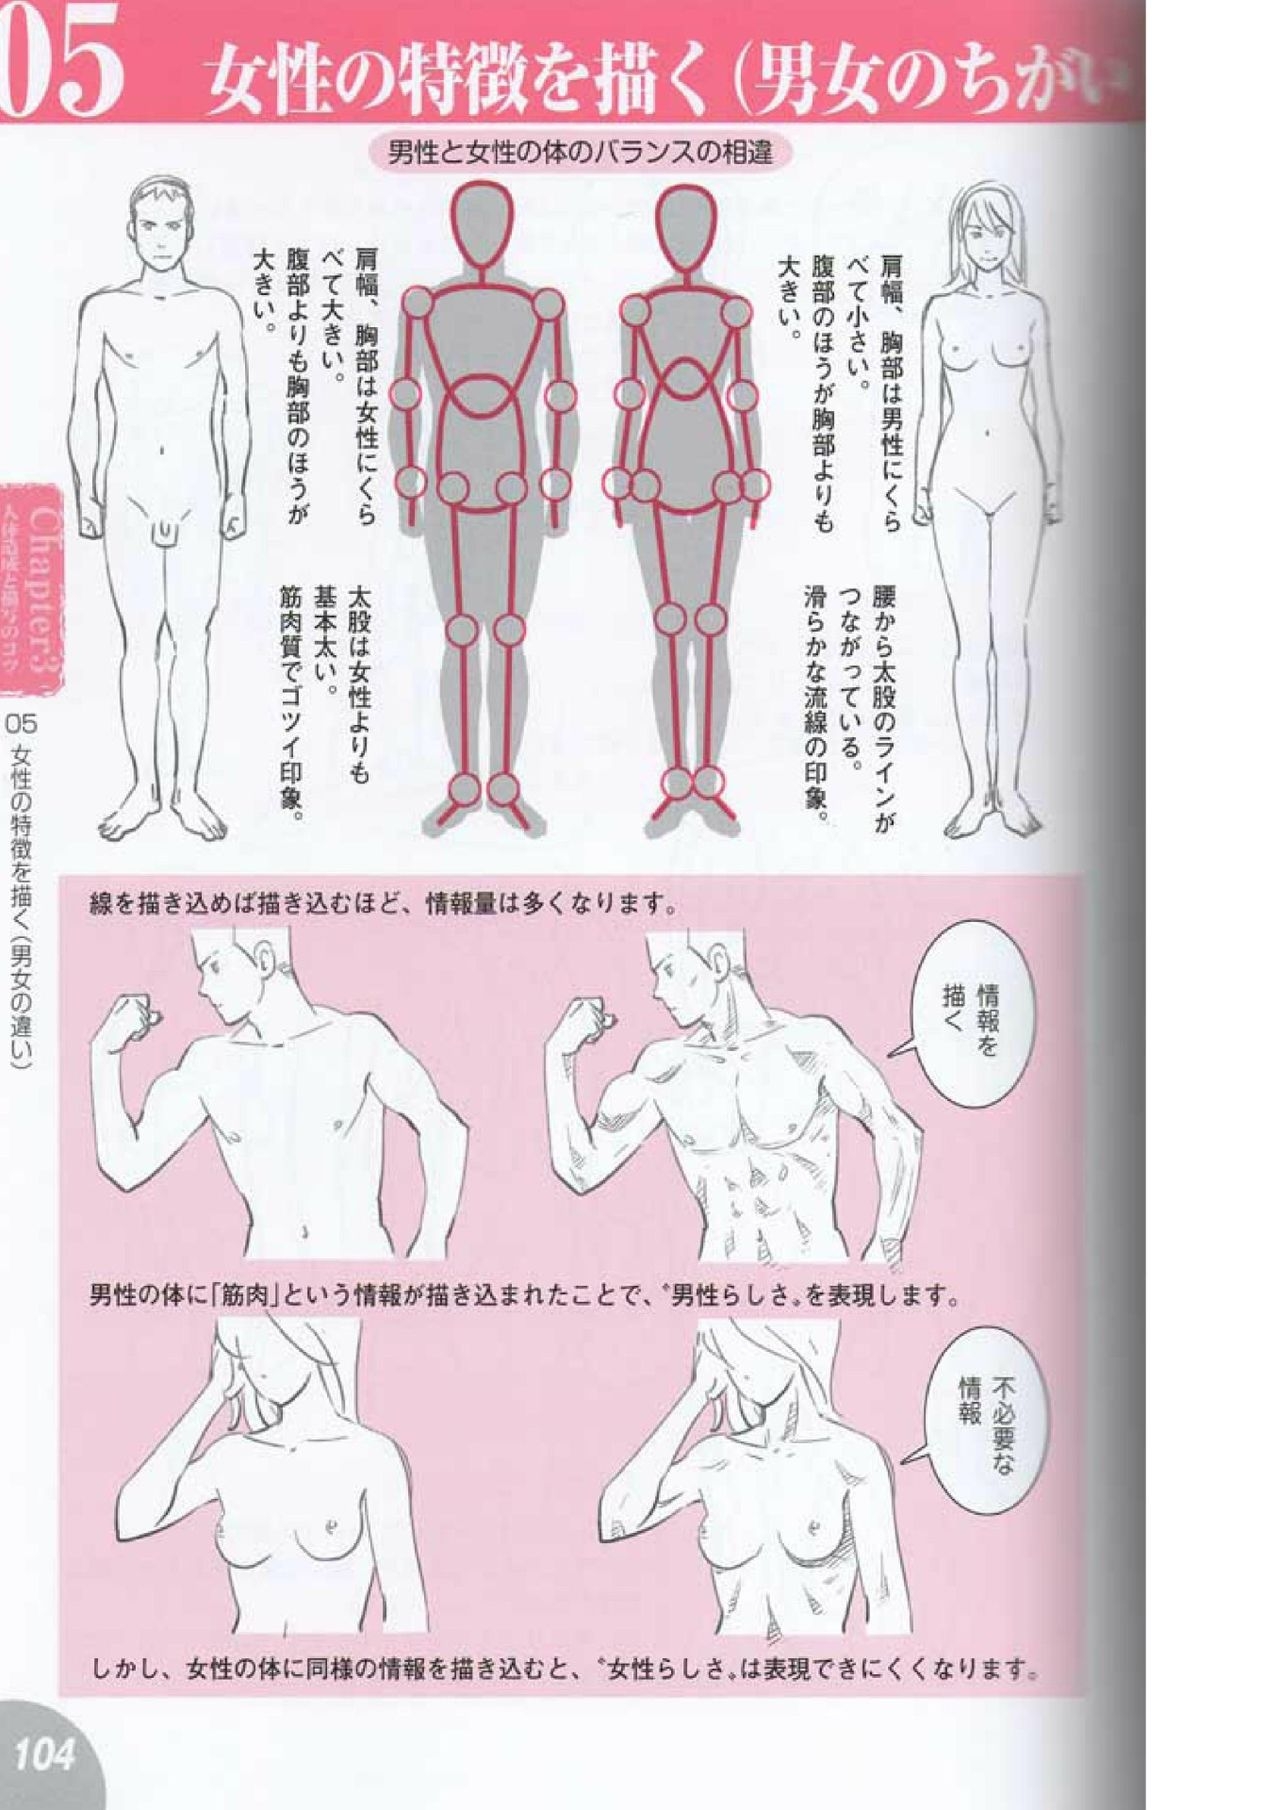 How to draw a character drawing from a human anatomical chart 102